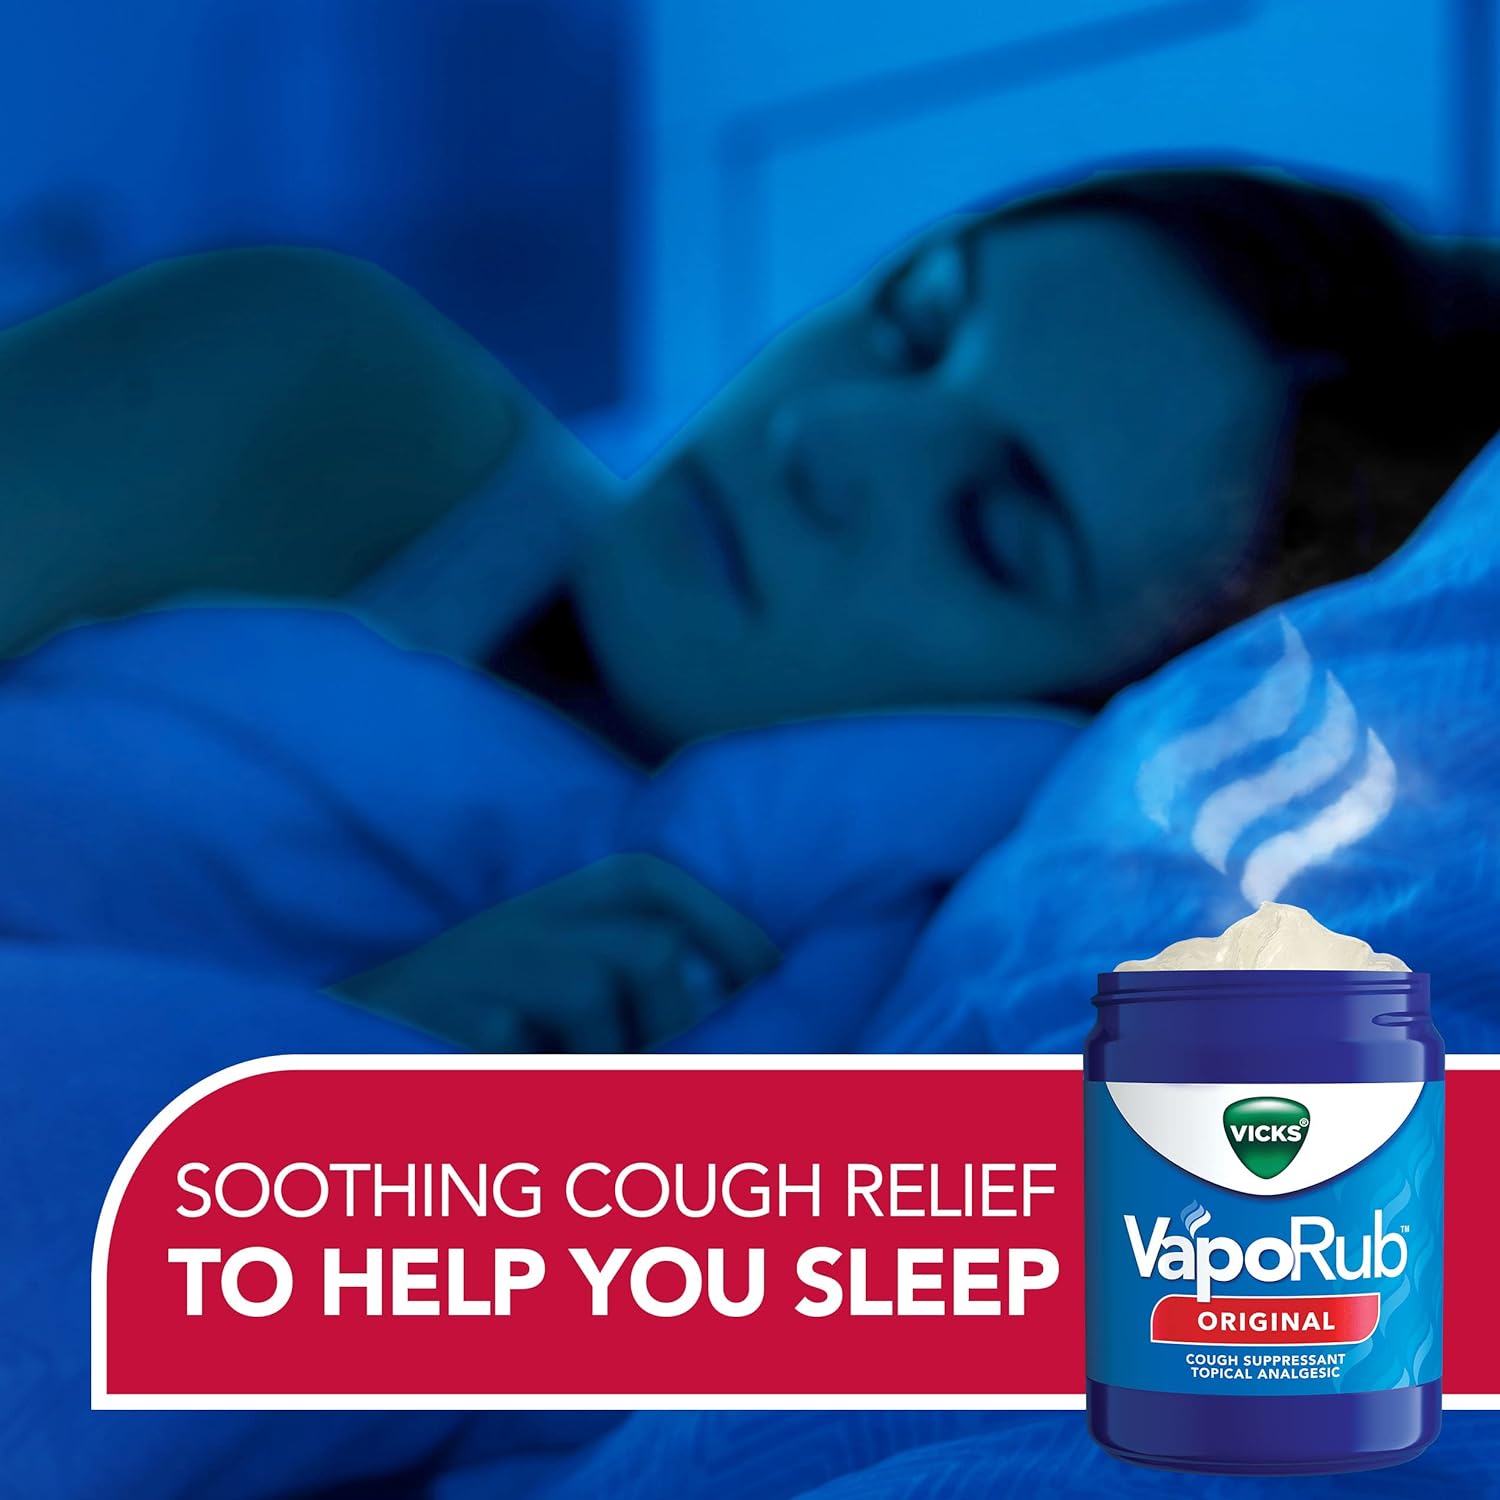 Vicks VapoRub, Original, Cough Suppressant, Topical Chest Rub & Analgesic Ointment, Medicated Vicks Vapors, Relief from Cough Due to Cold, Aches & Pains, 6 Oz (Pack of 2) : Health & Household